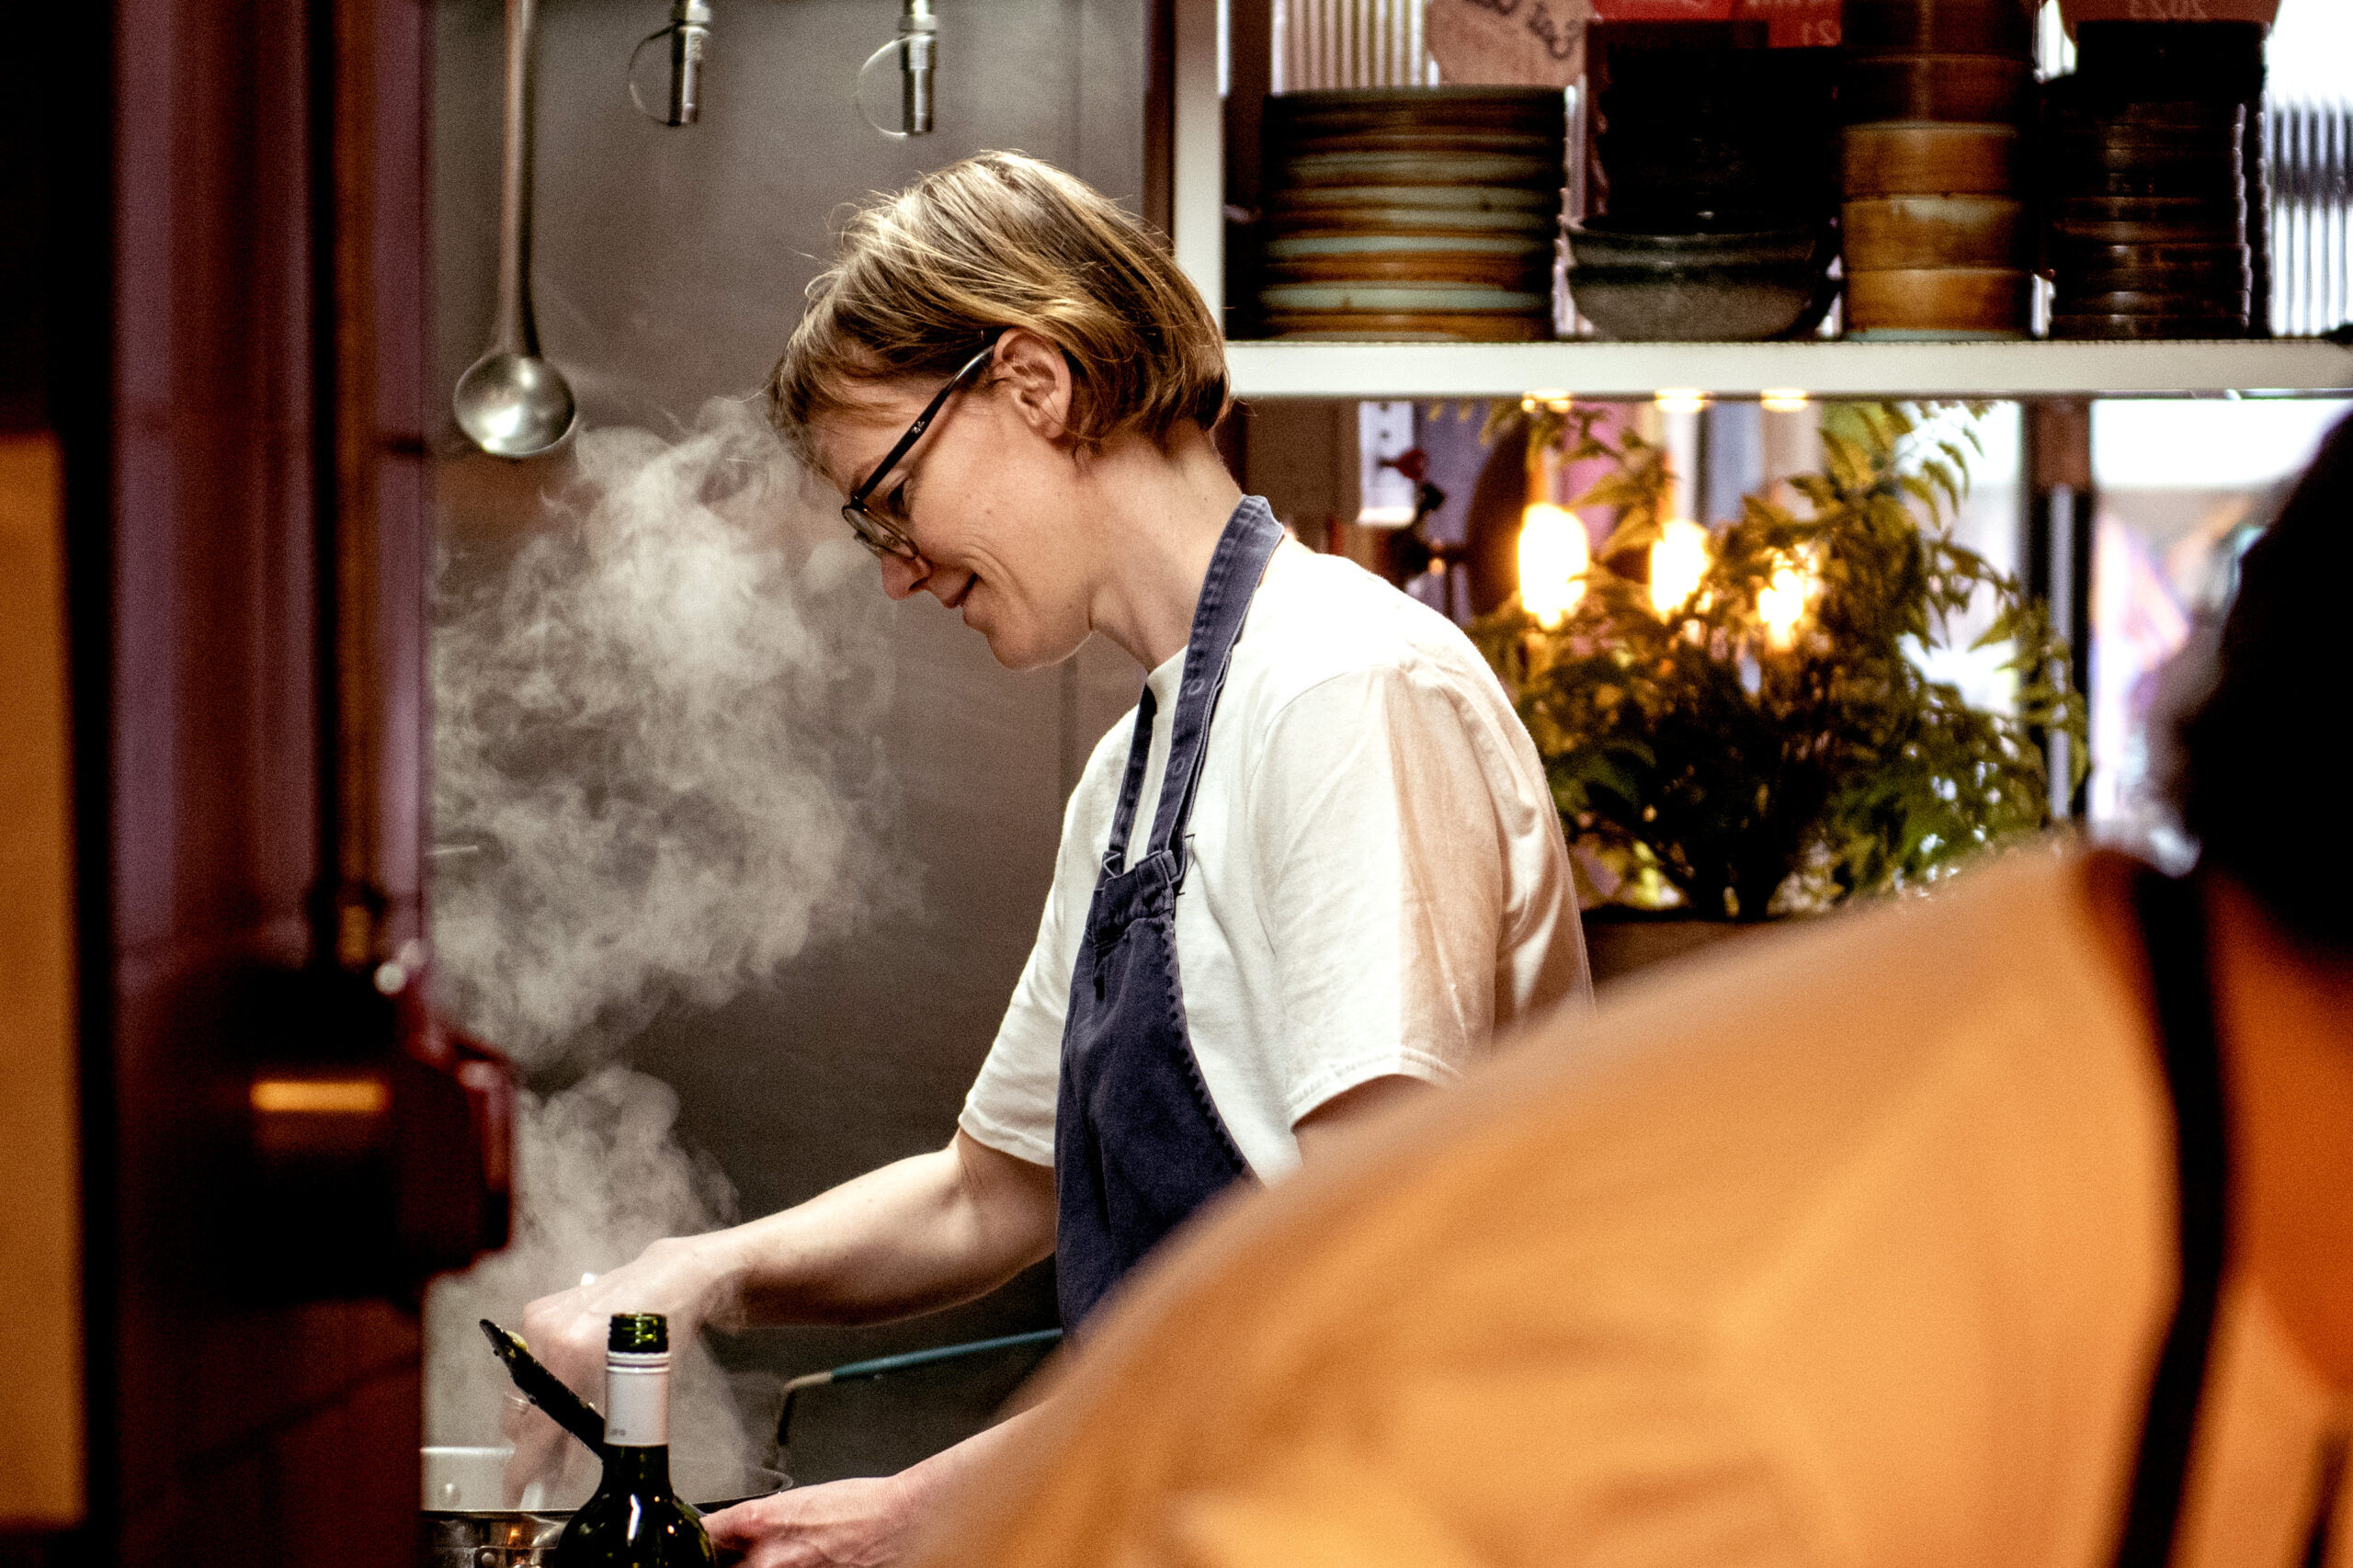 Holly, chef at work over a steaming pan with another chef in the foreground